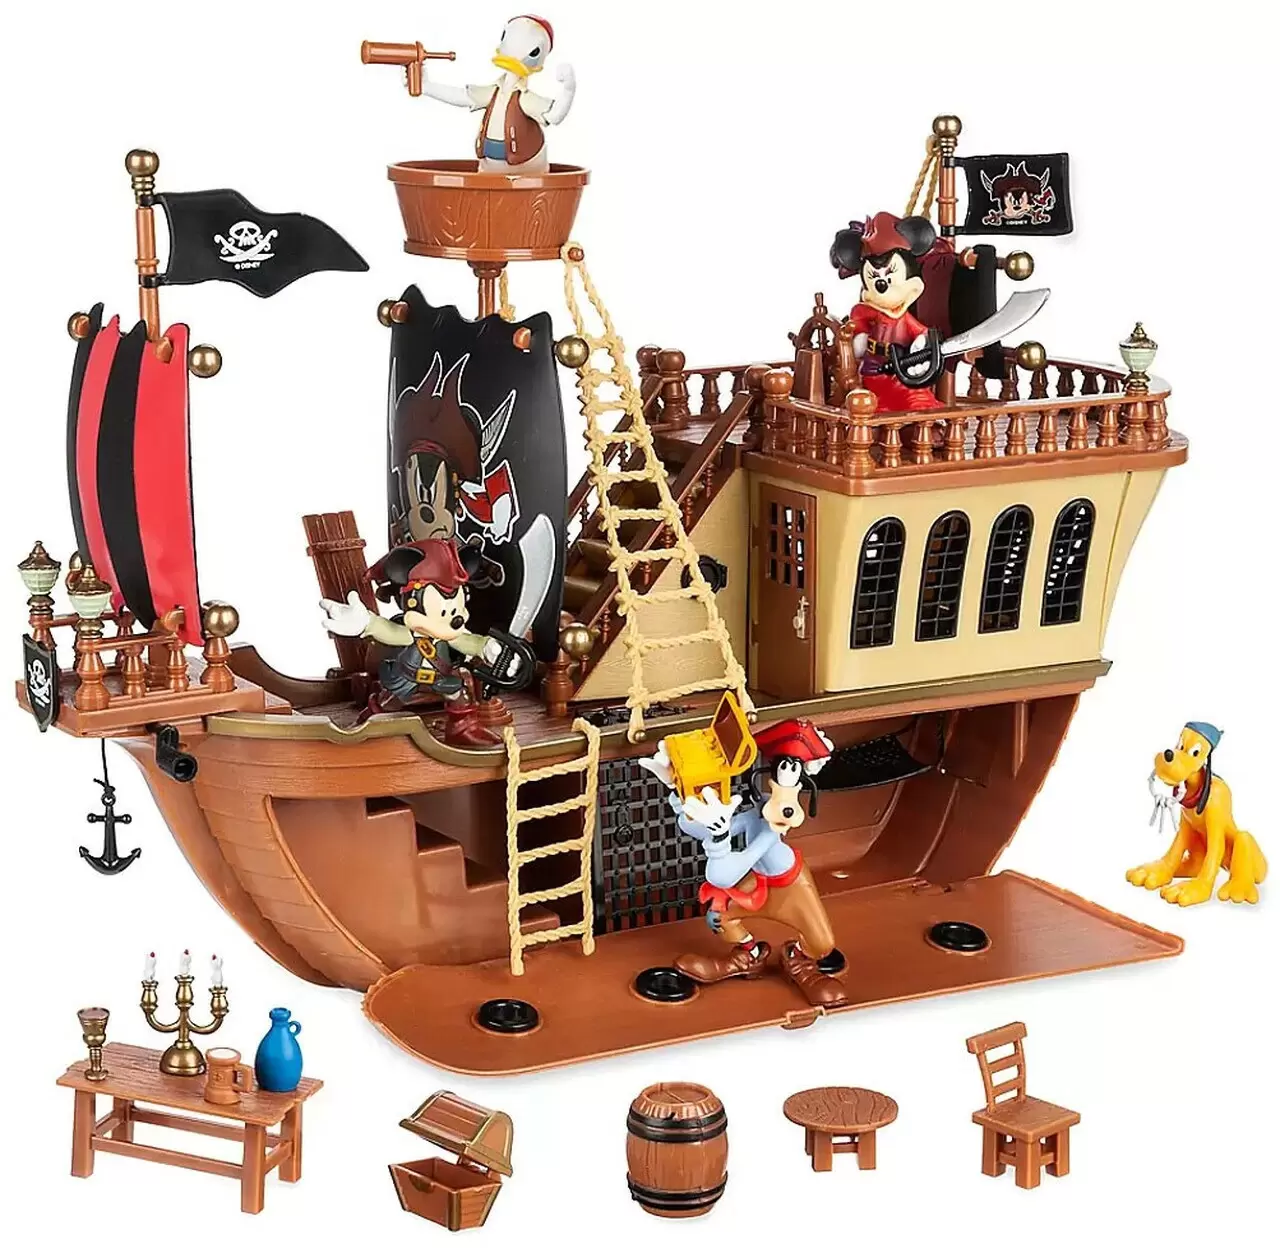 Disney Pirates of the Caribbean Mickey Mouse - Pirate Ship Exclusive Playset